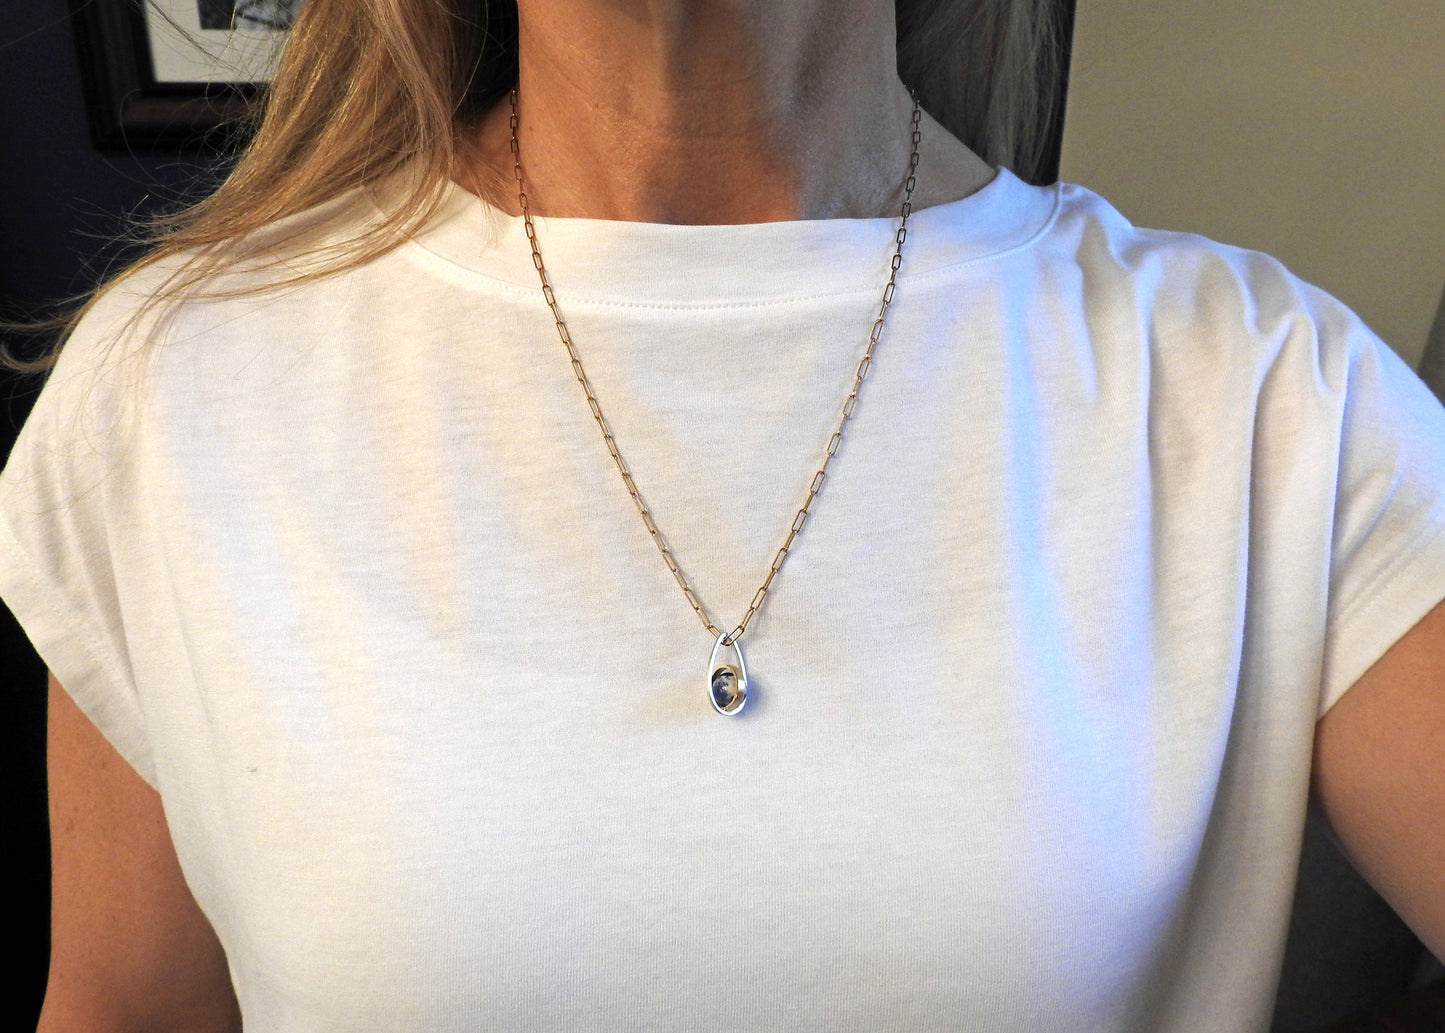 Worldly perspective: new pendant added to the Astral collection . 14 kt yellow gold band within sterling silver wire drop shape holding a free floating worldly looking sodalite undrilled sphere bead.   on 14kty 18" cable chain, by ZEALmetal, Nicole Horlor, in Kingston, ON, Canada